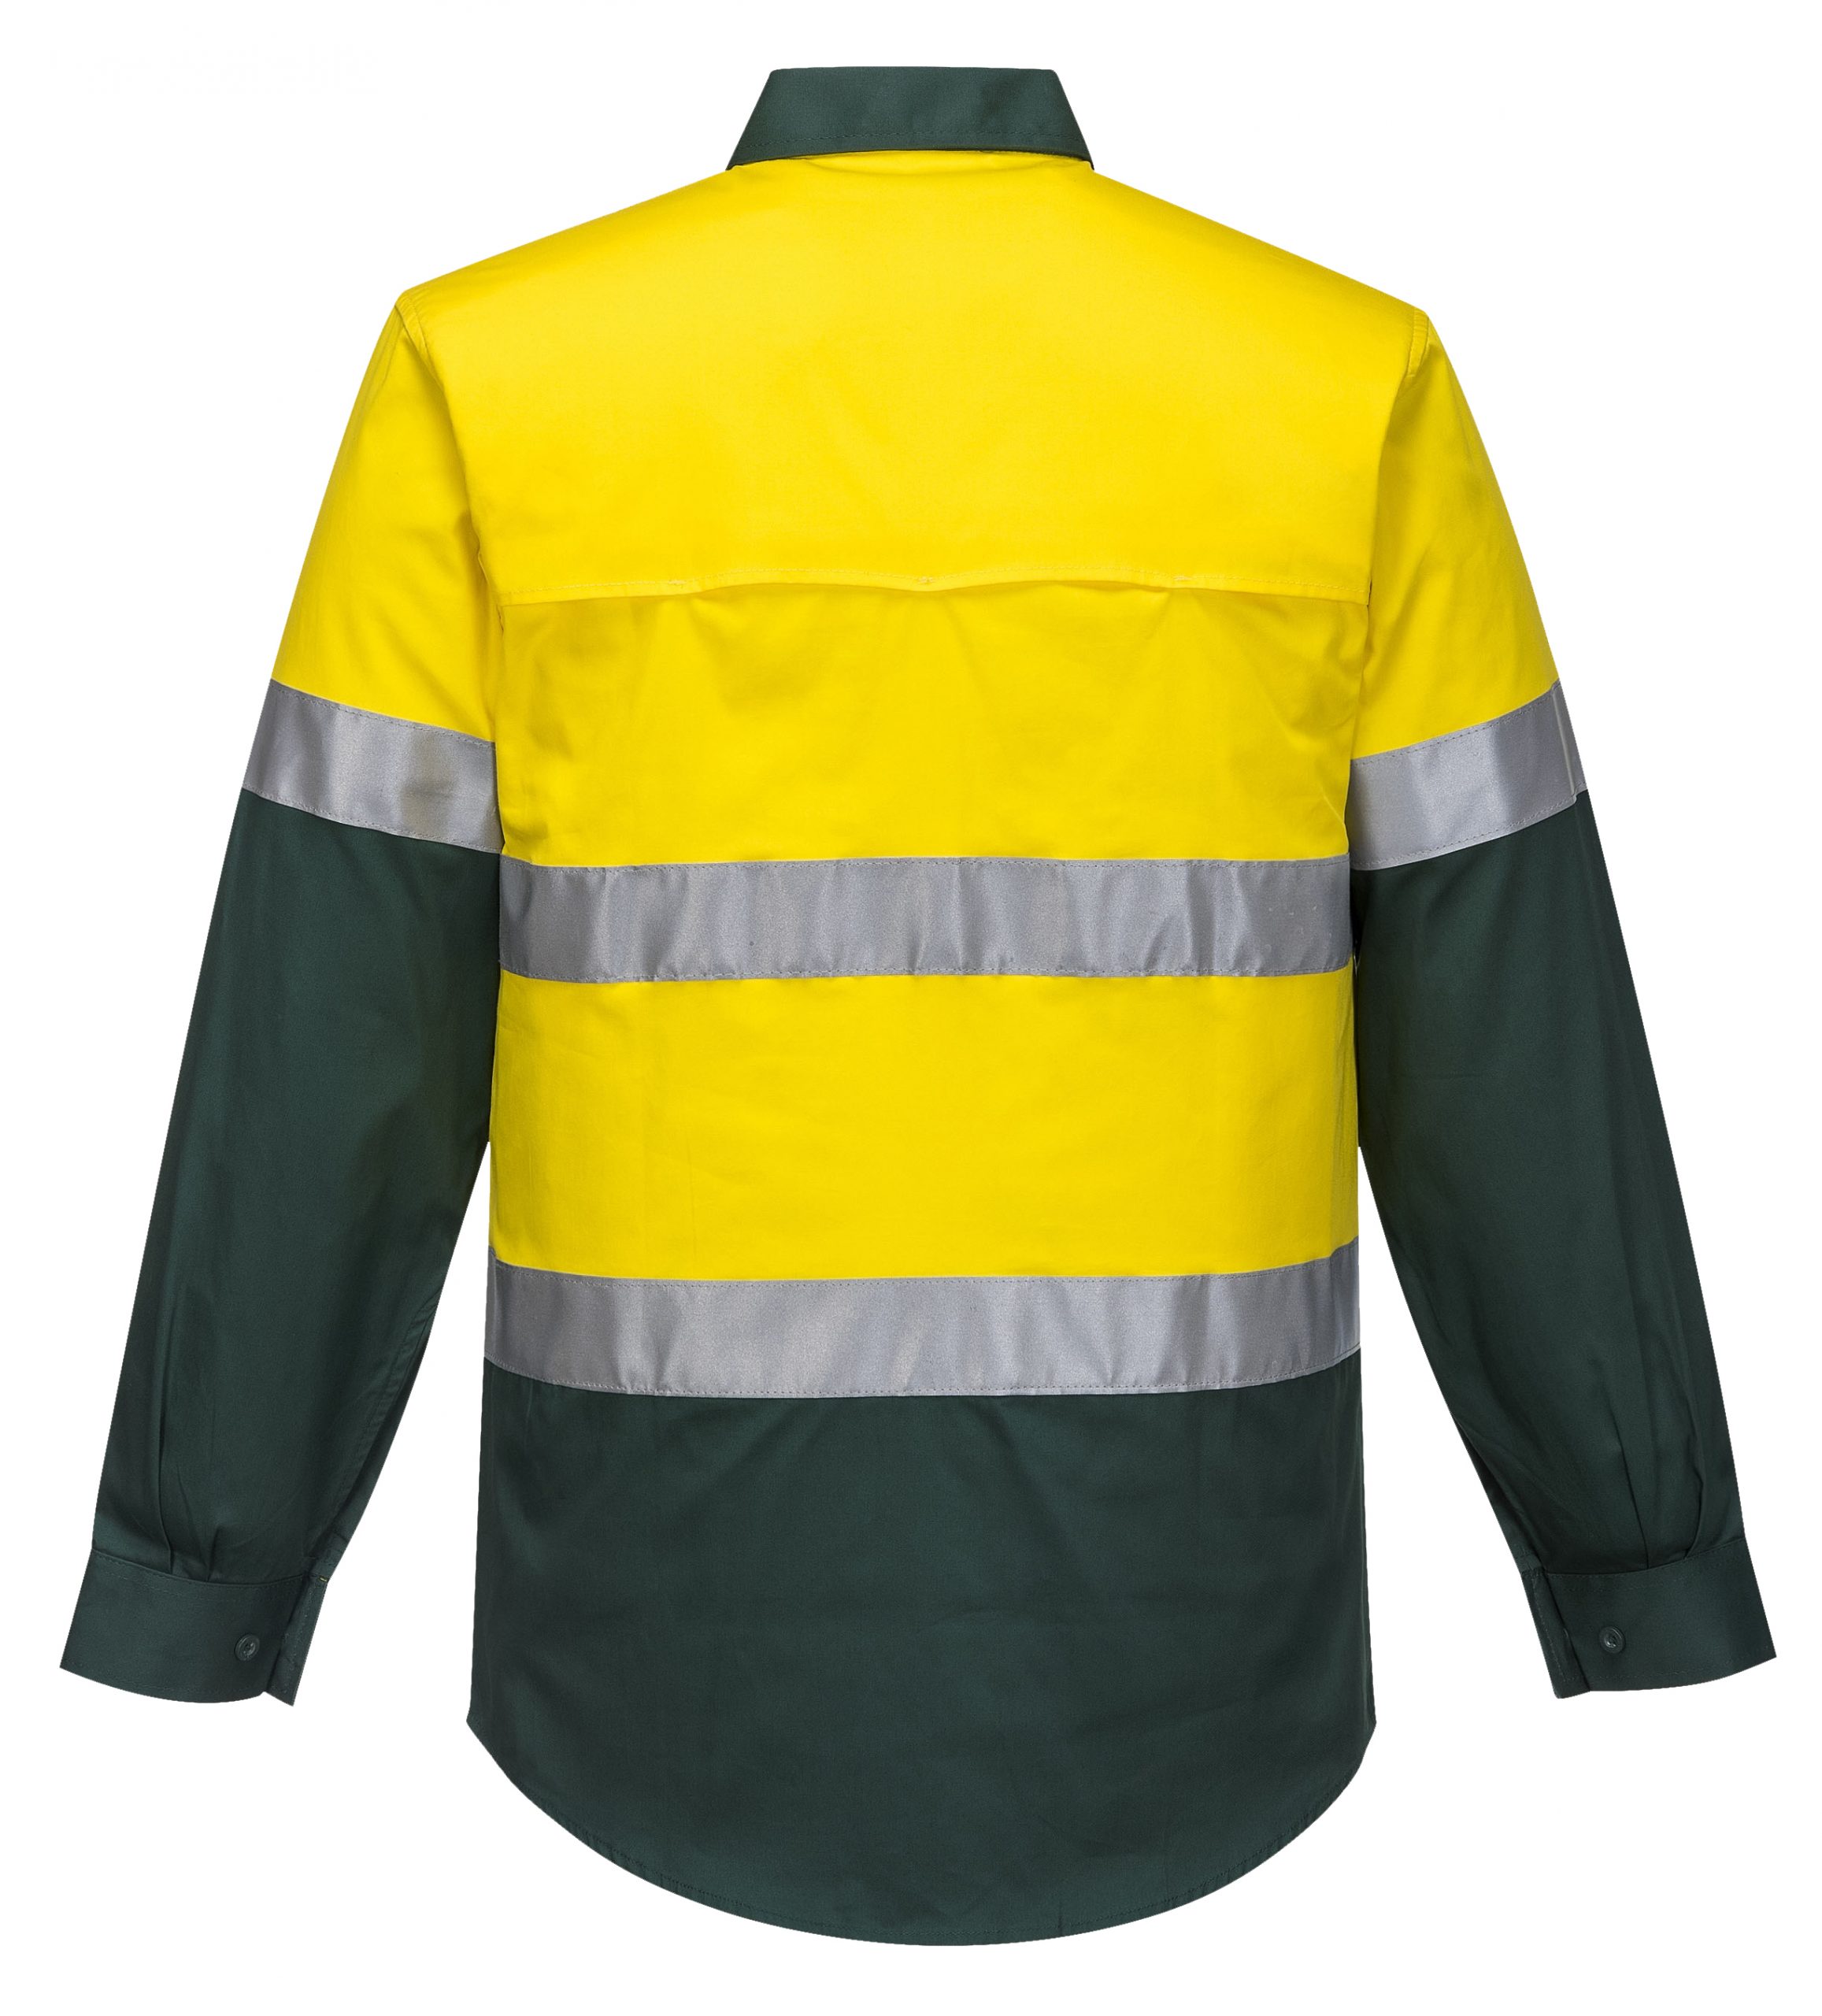 MA801 - Hi-Vis Two Tone Cotton Lightweight Long Sleeve Shirt with Tape GRE2